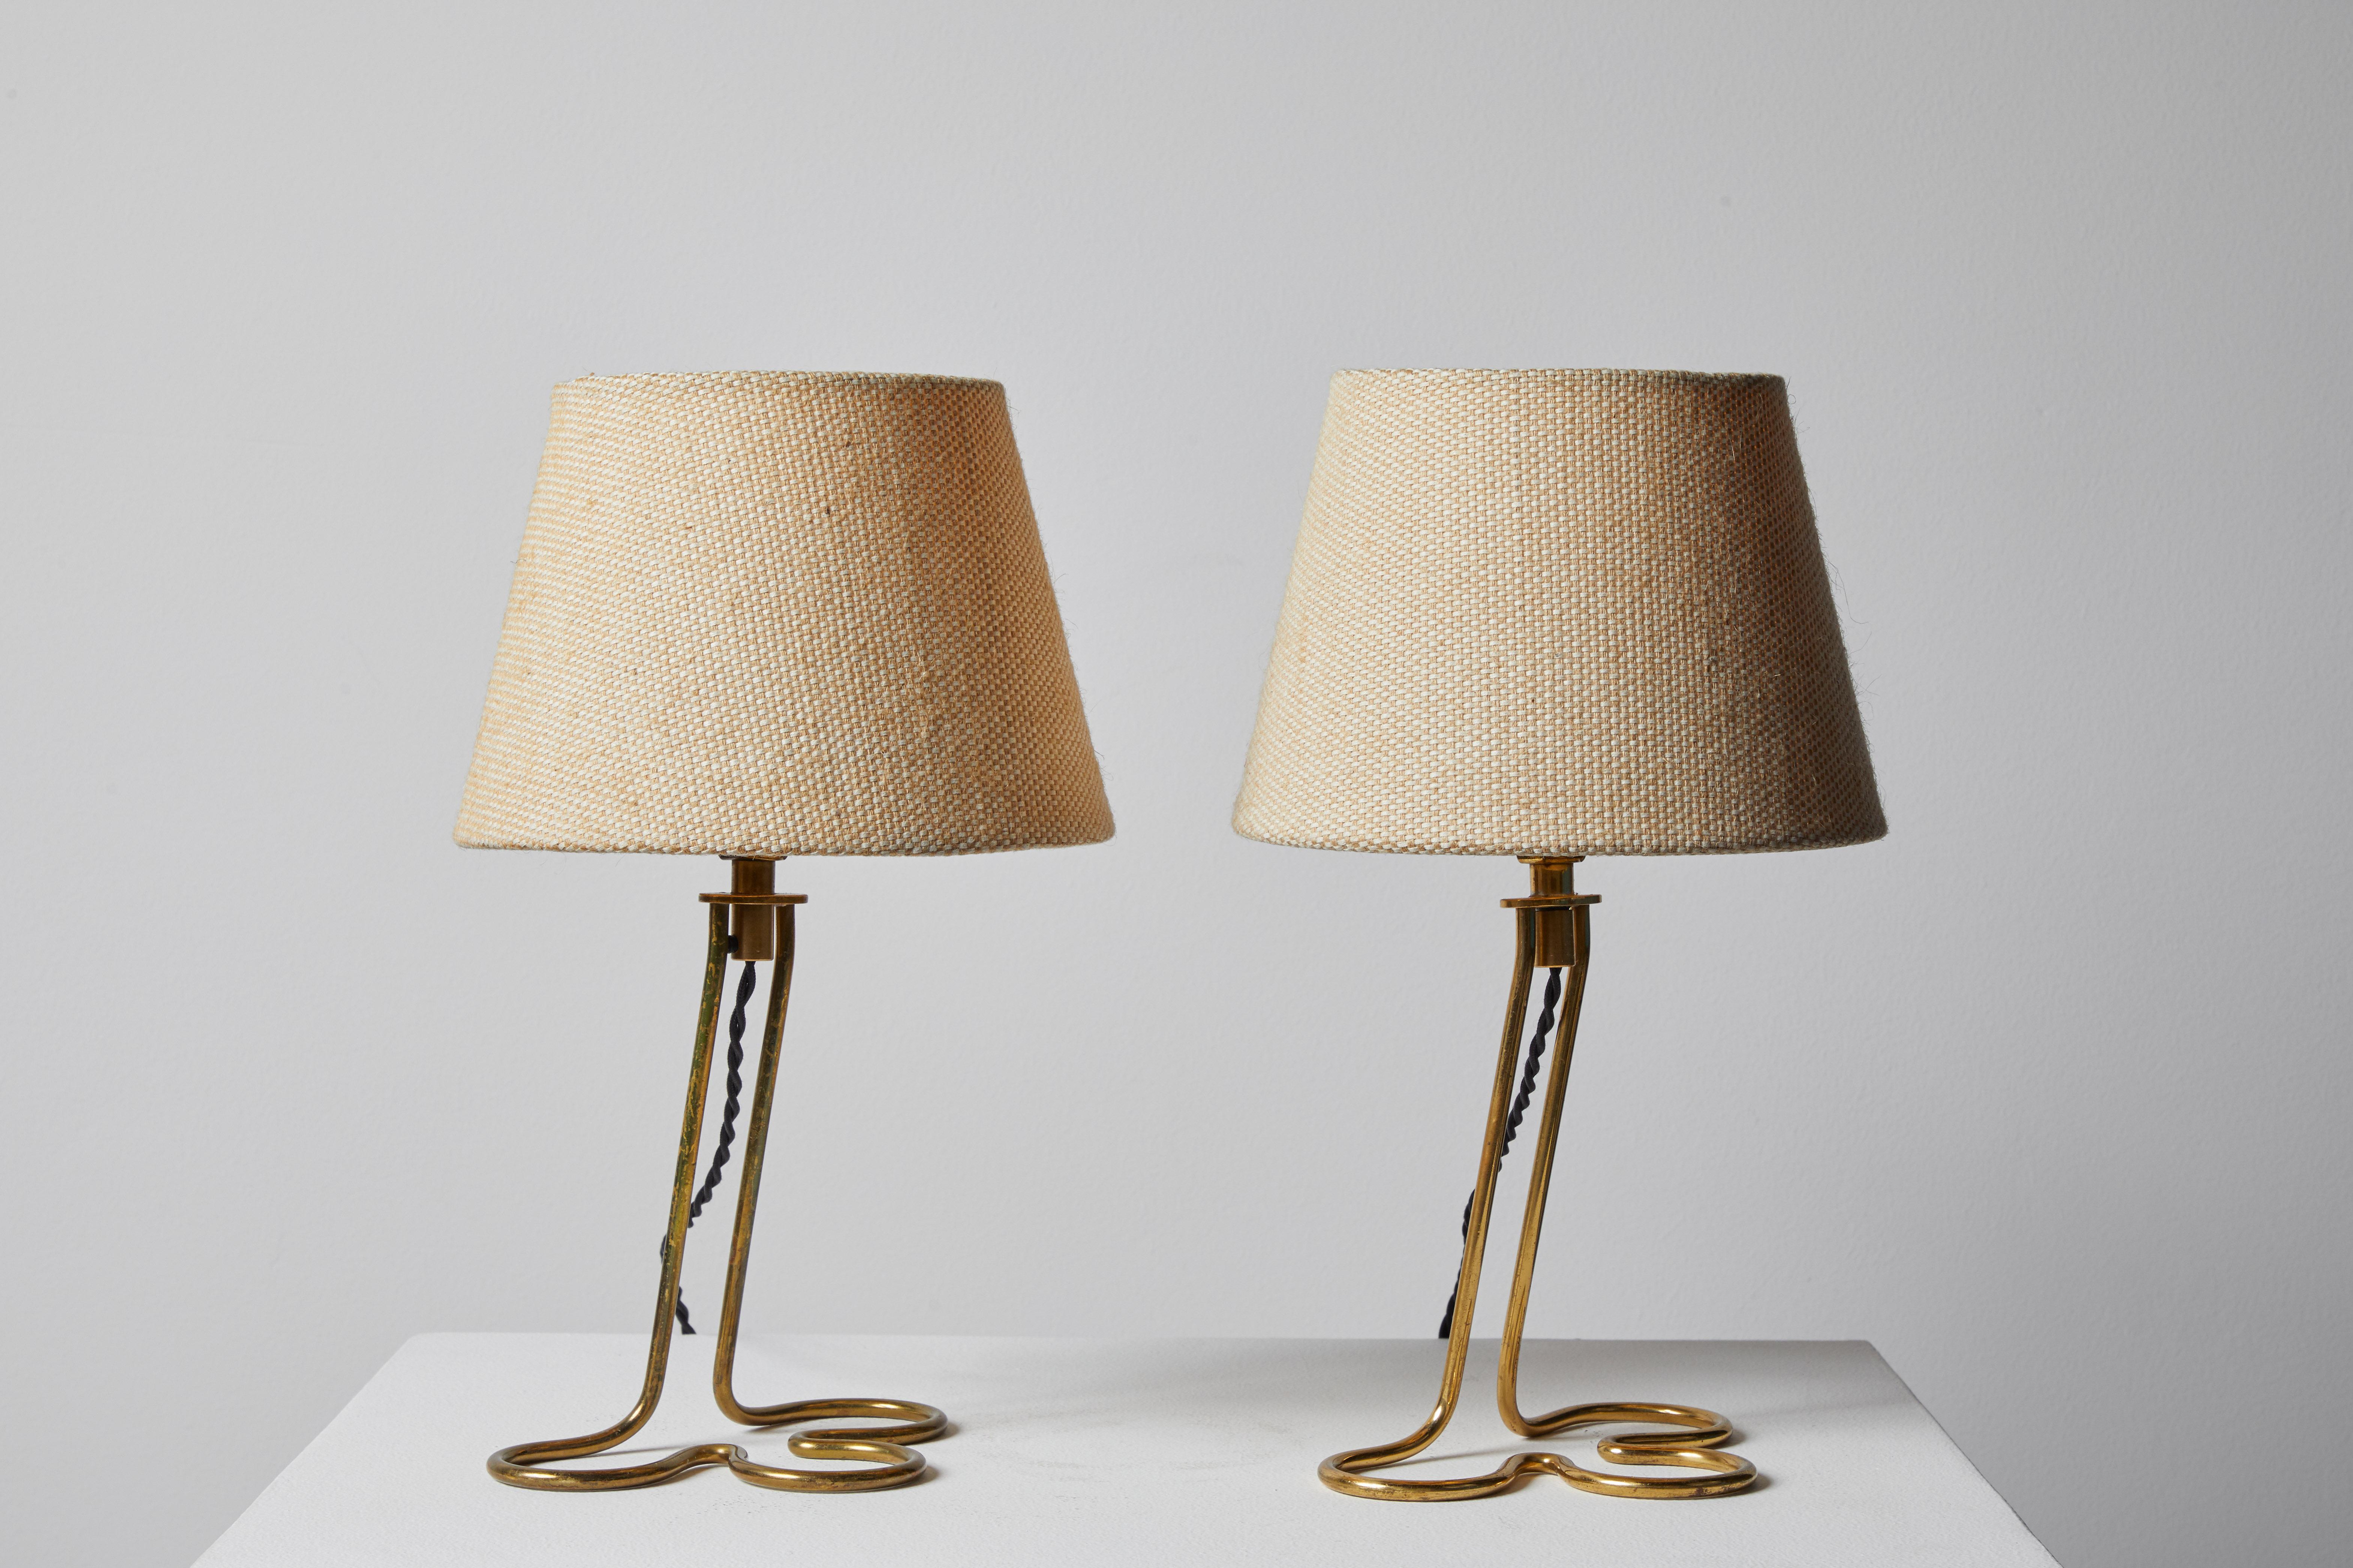 Pair of Table/Wall Lights by Mauri Almari for Idman Oy. Designed and manufactured in Finland, circa 1950s. Brass base, textured linen shades. Can be mounted on wall or used as table lamps. Each light takes one E27 75w maximum bulb. Bulbs provided as